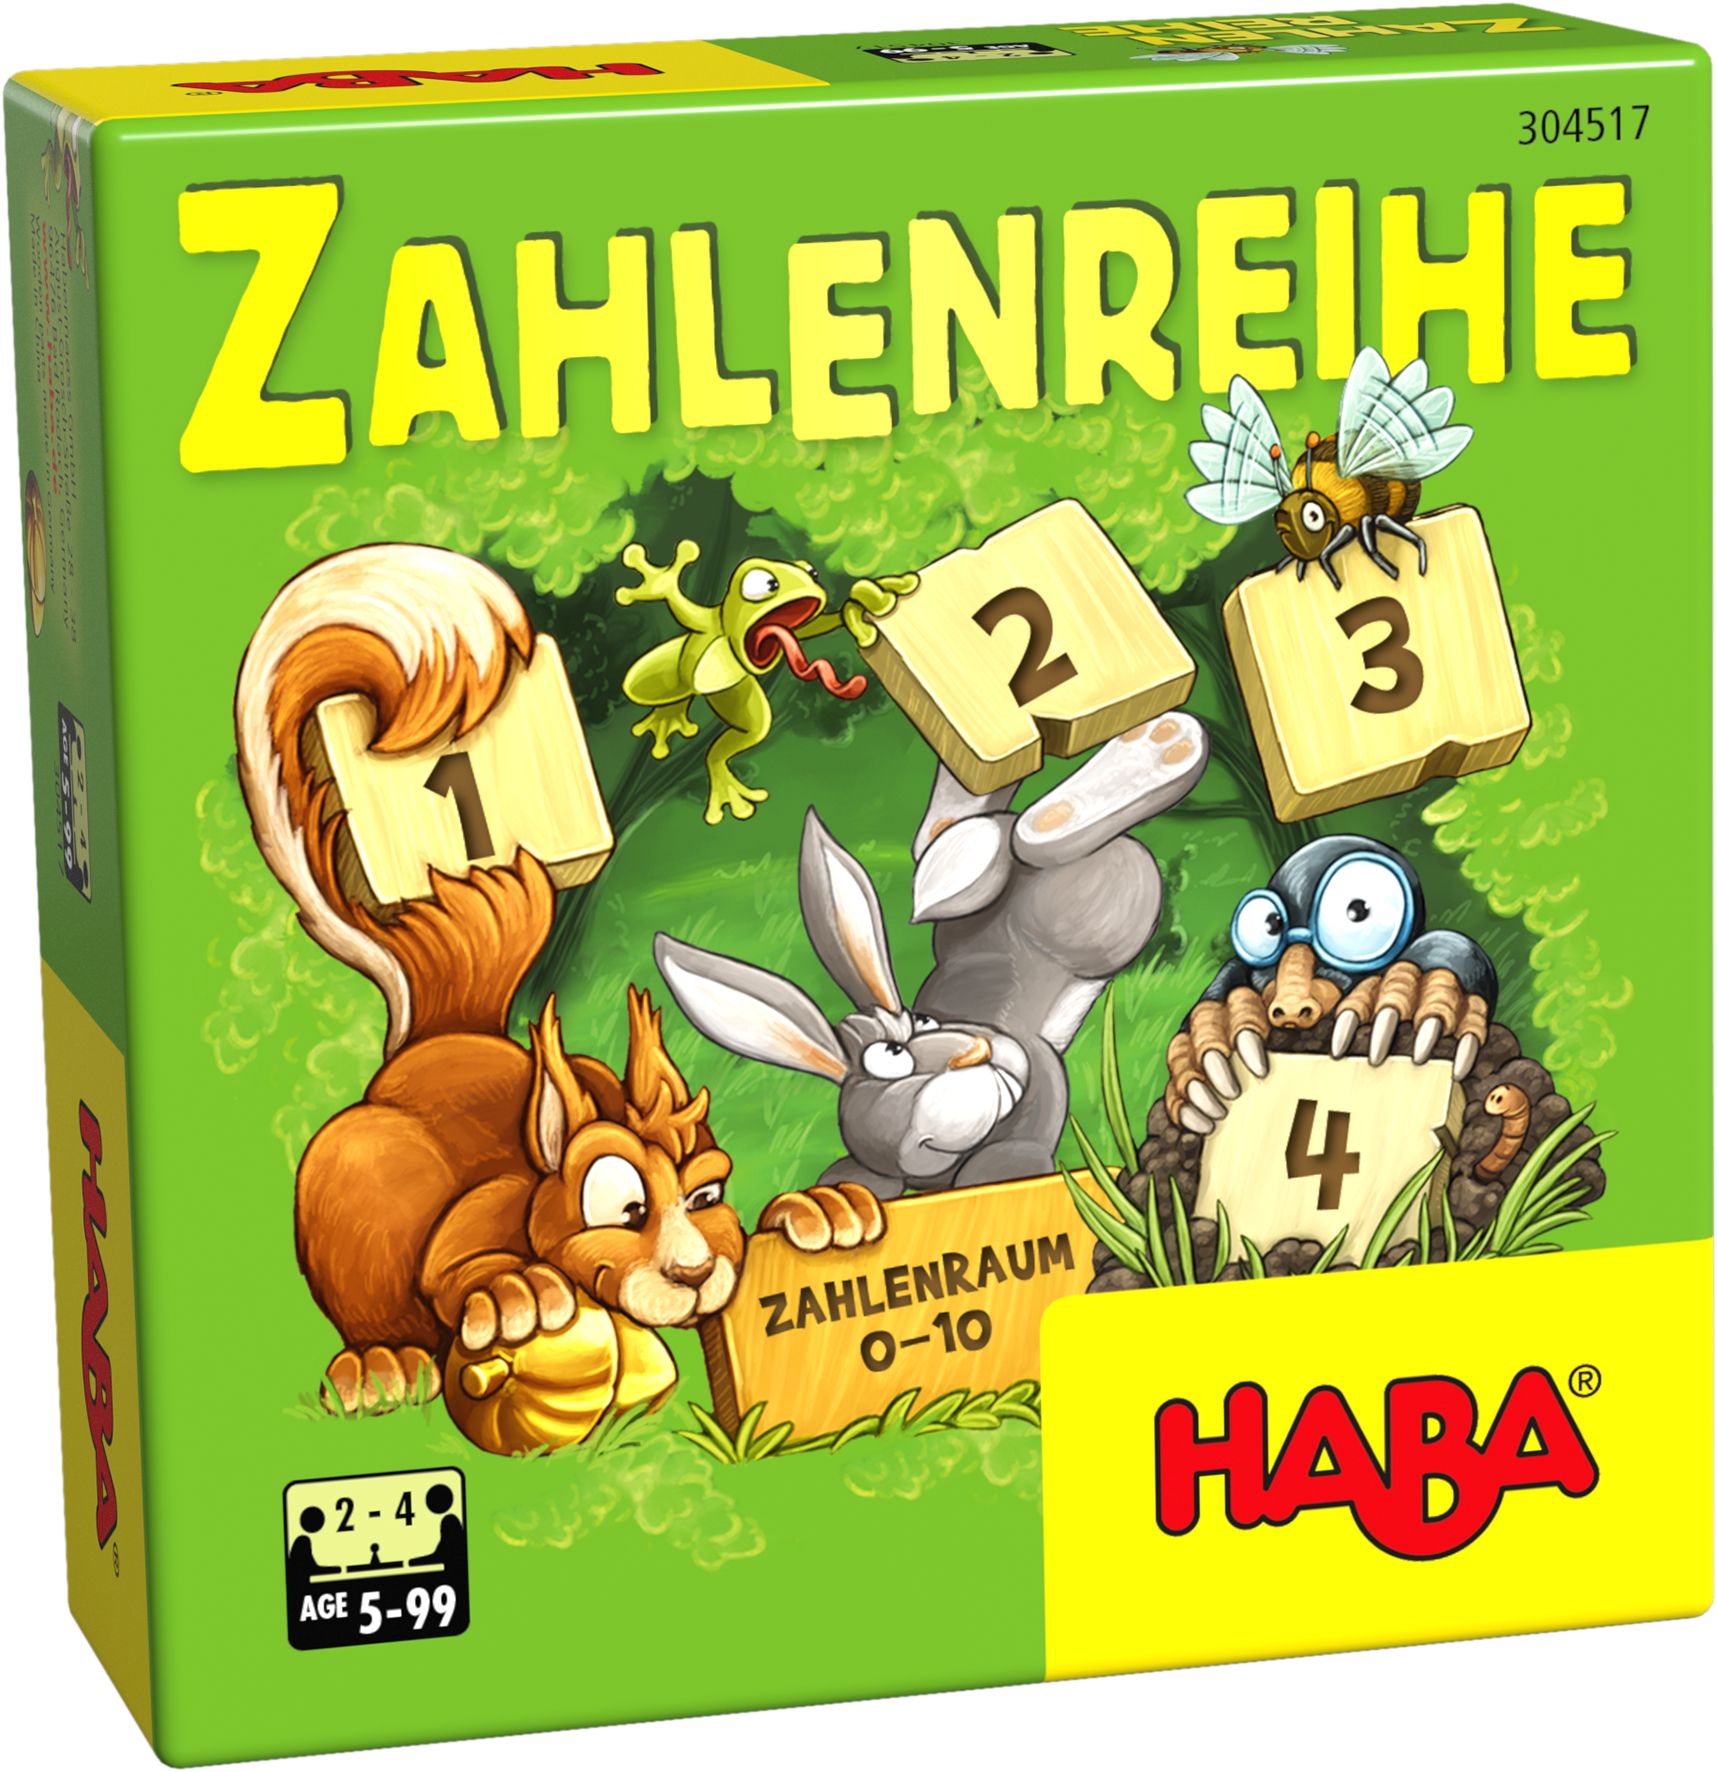 Number Sequence - Zahlenreihe